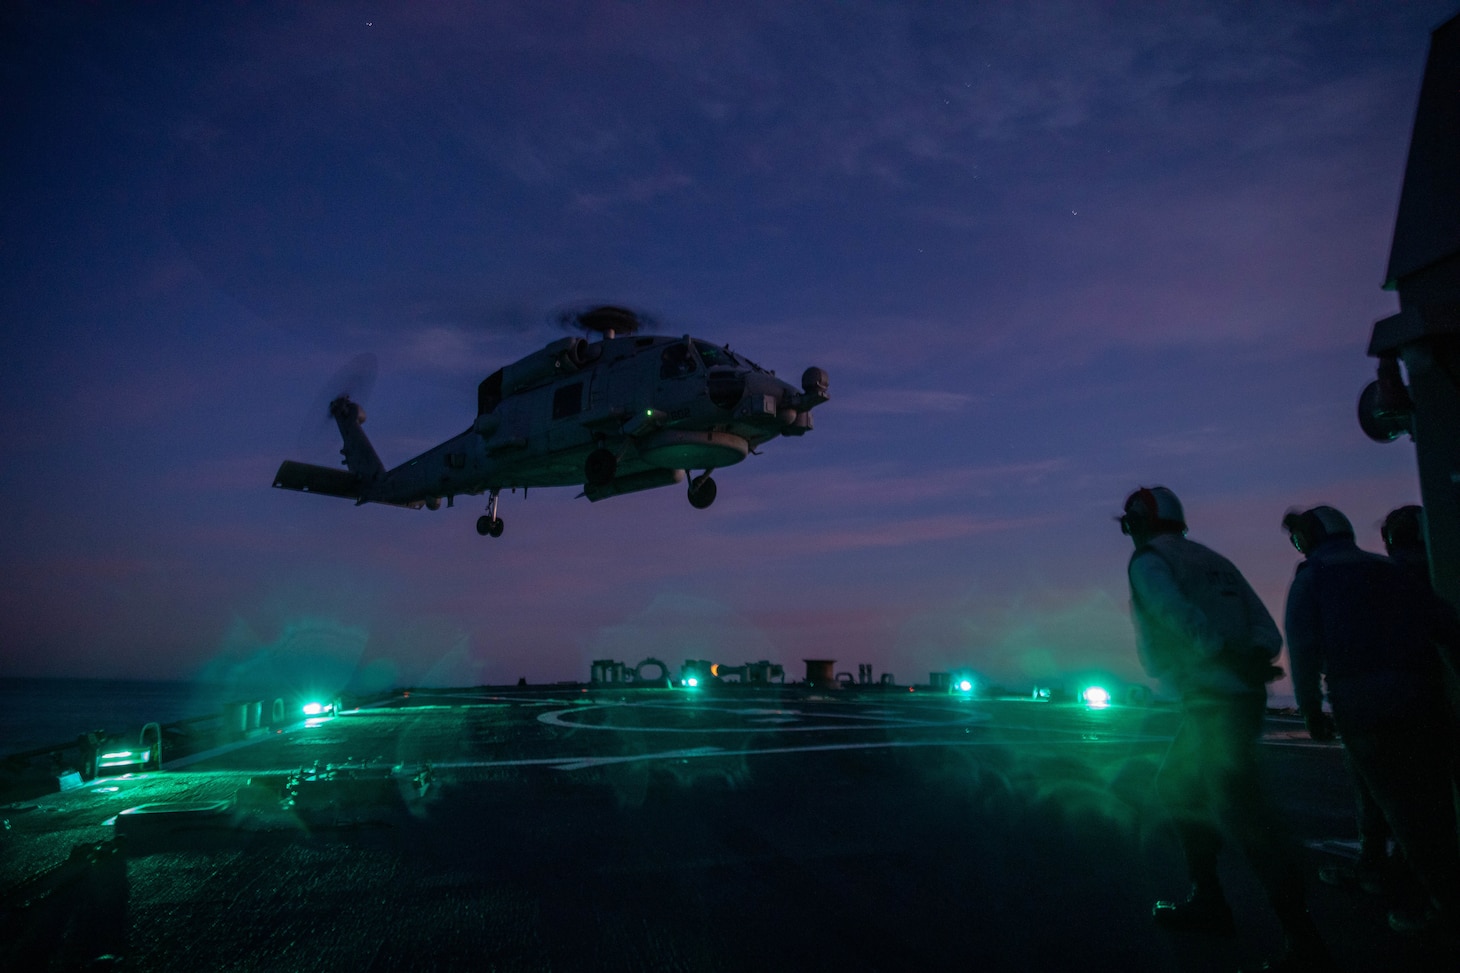 Sailors assigned to Arleigh Burke-class guided-missile destroyer USS Donald Cook (DDG 75) watch as an MH-60R Seahawk helicopter of the "Jaguars" of Helicopter Maritime Strike Squadron (HSM) 60 departs the flight deck, March 8.